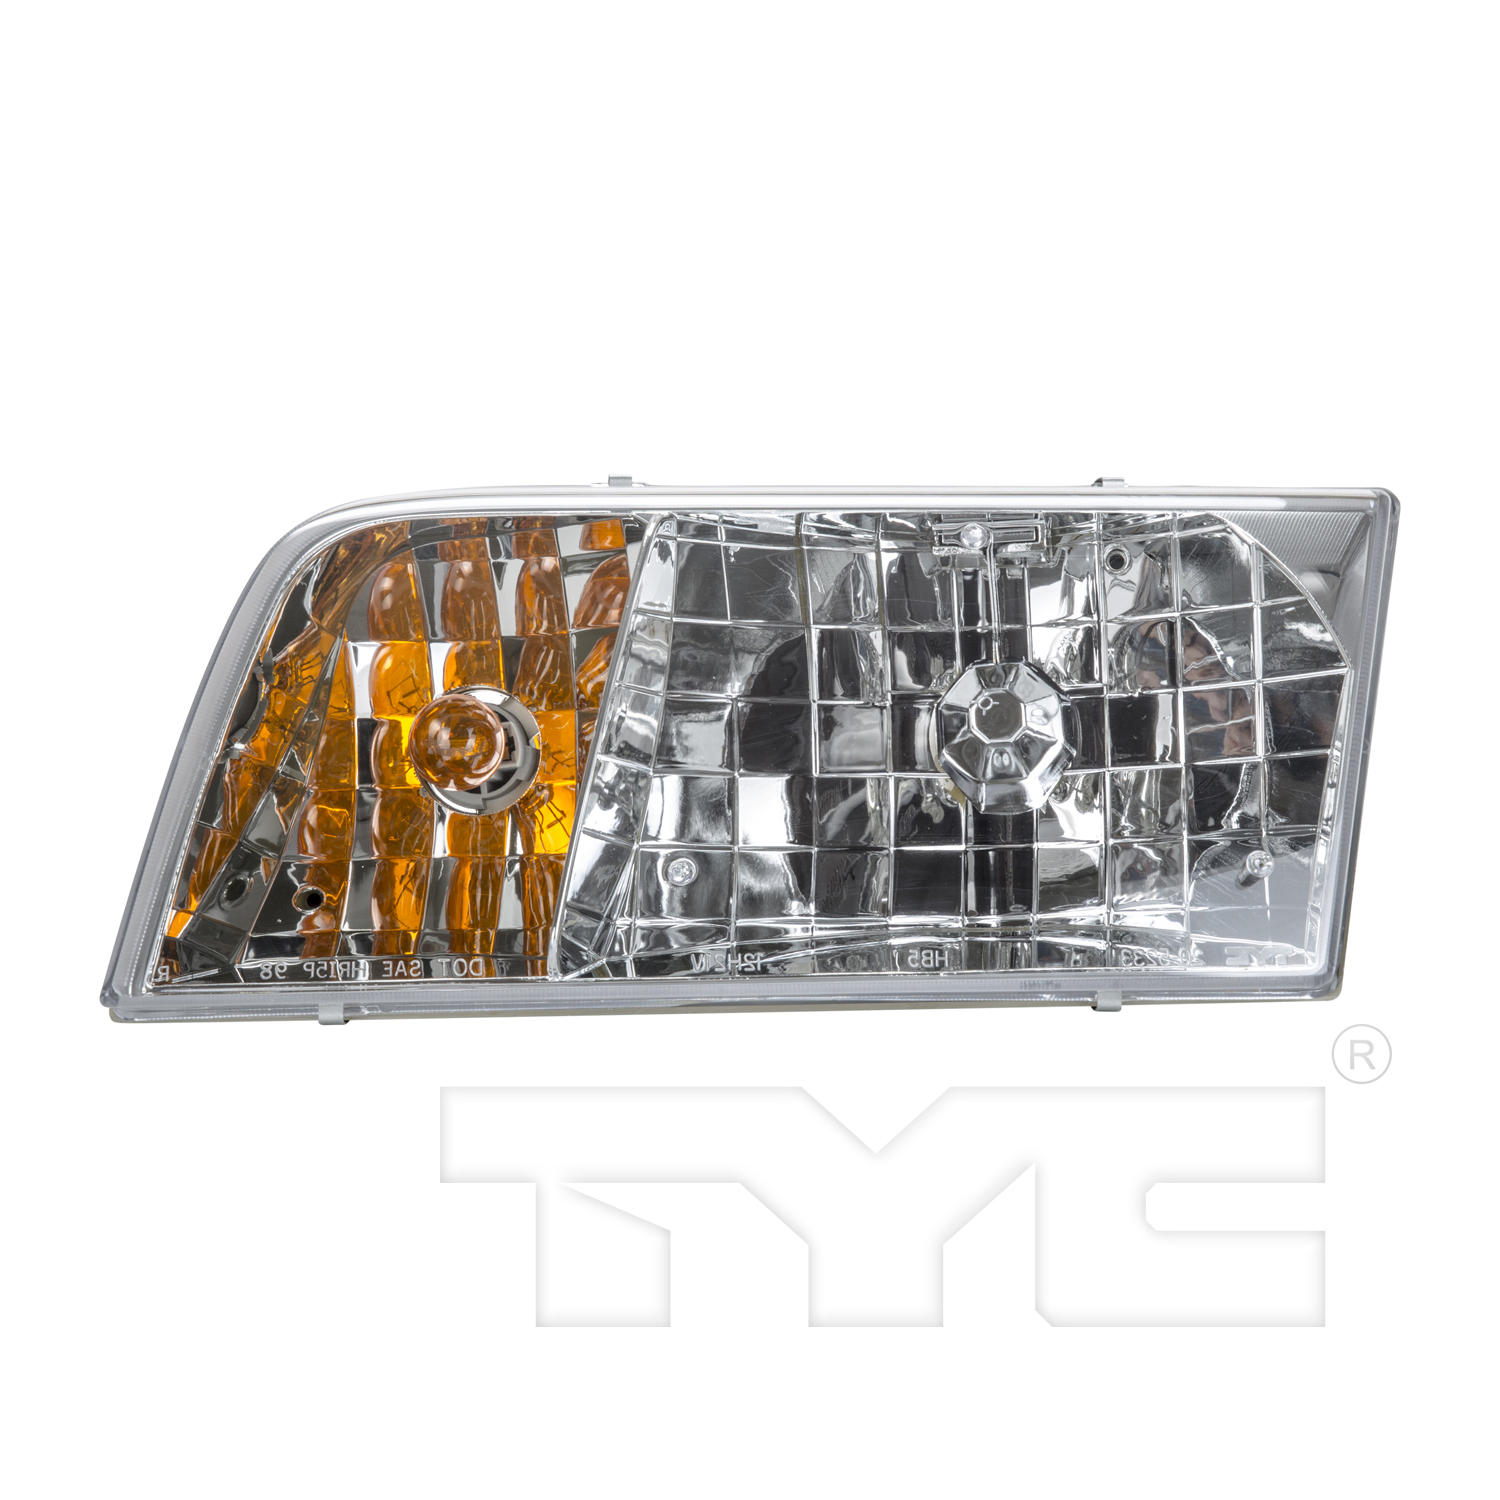 Aftermarket HEADLIGHTS for FORD - CROWN VICTORIA, CROWN VICTORIA,98-02,LT Headlamp assy composite